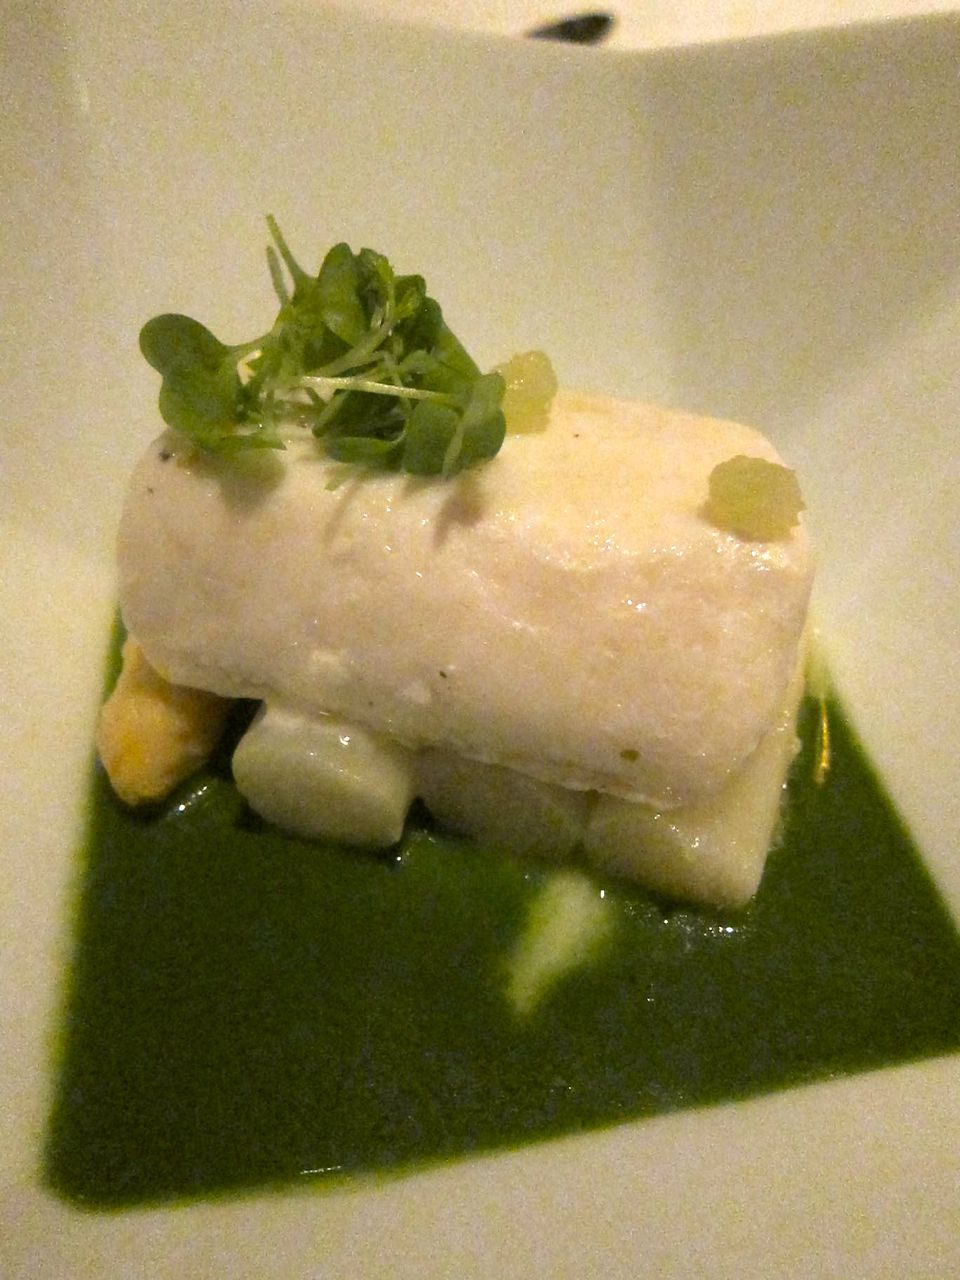 Jean-Georges’ halibut in herbal lemongrass sauce disguised as a monument.